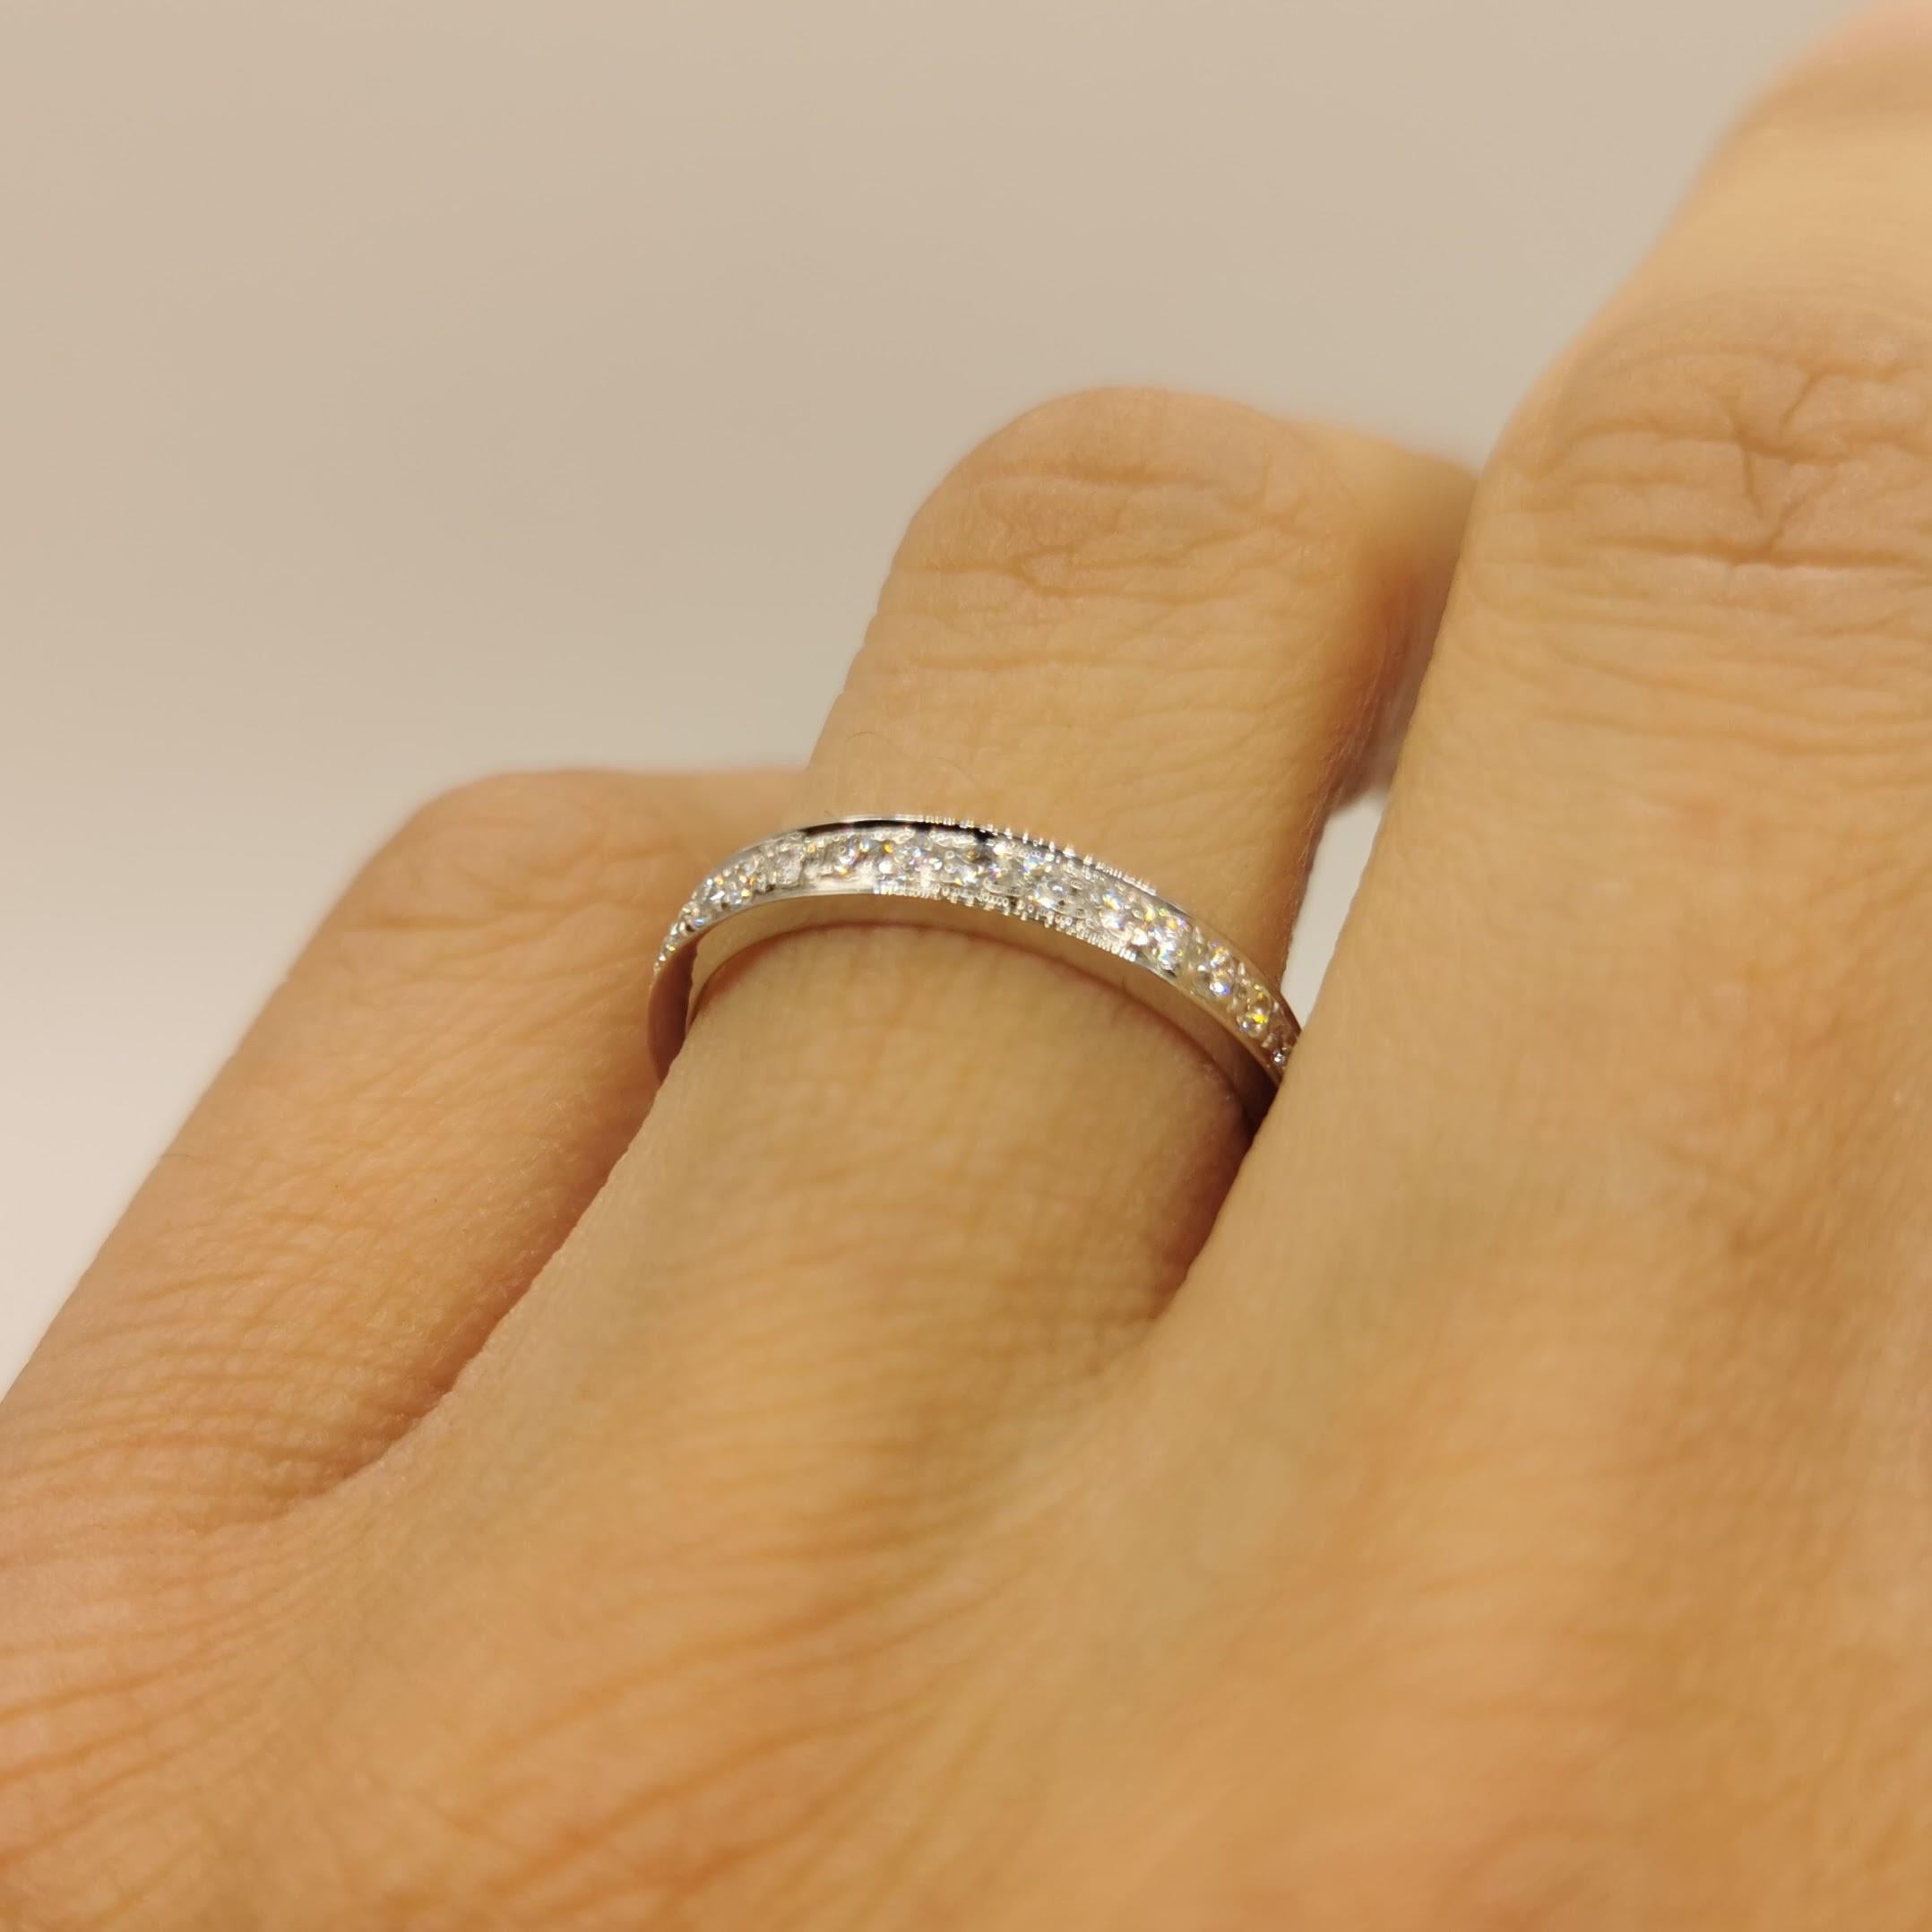 For Sale:  18K White Gold Channel Set Diamond Pavé Eternity Band Wedding Stacking Ring 5